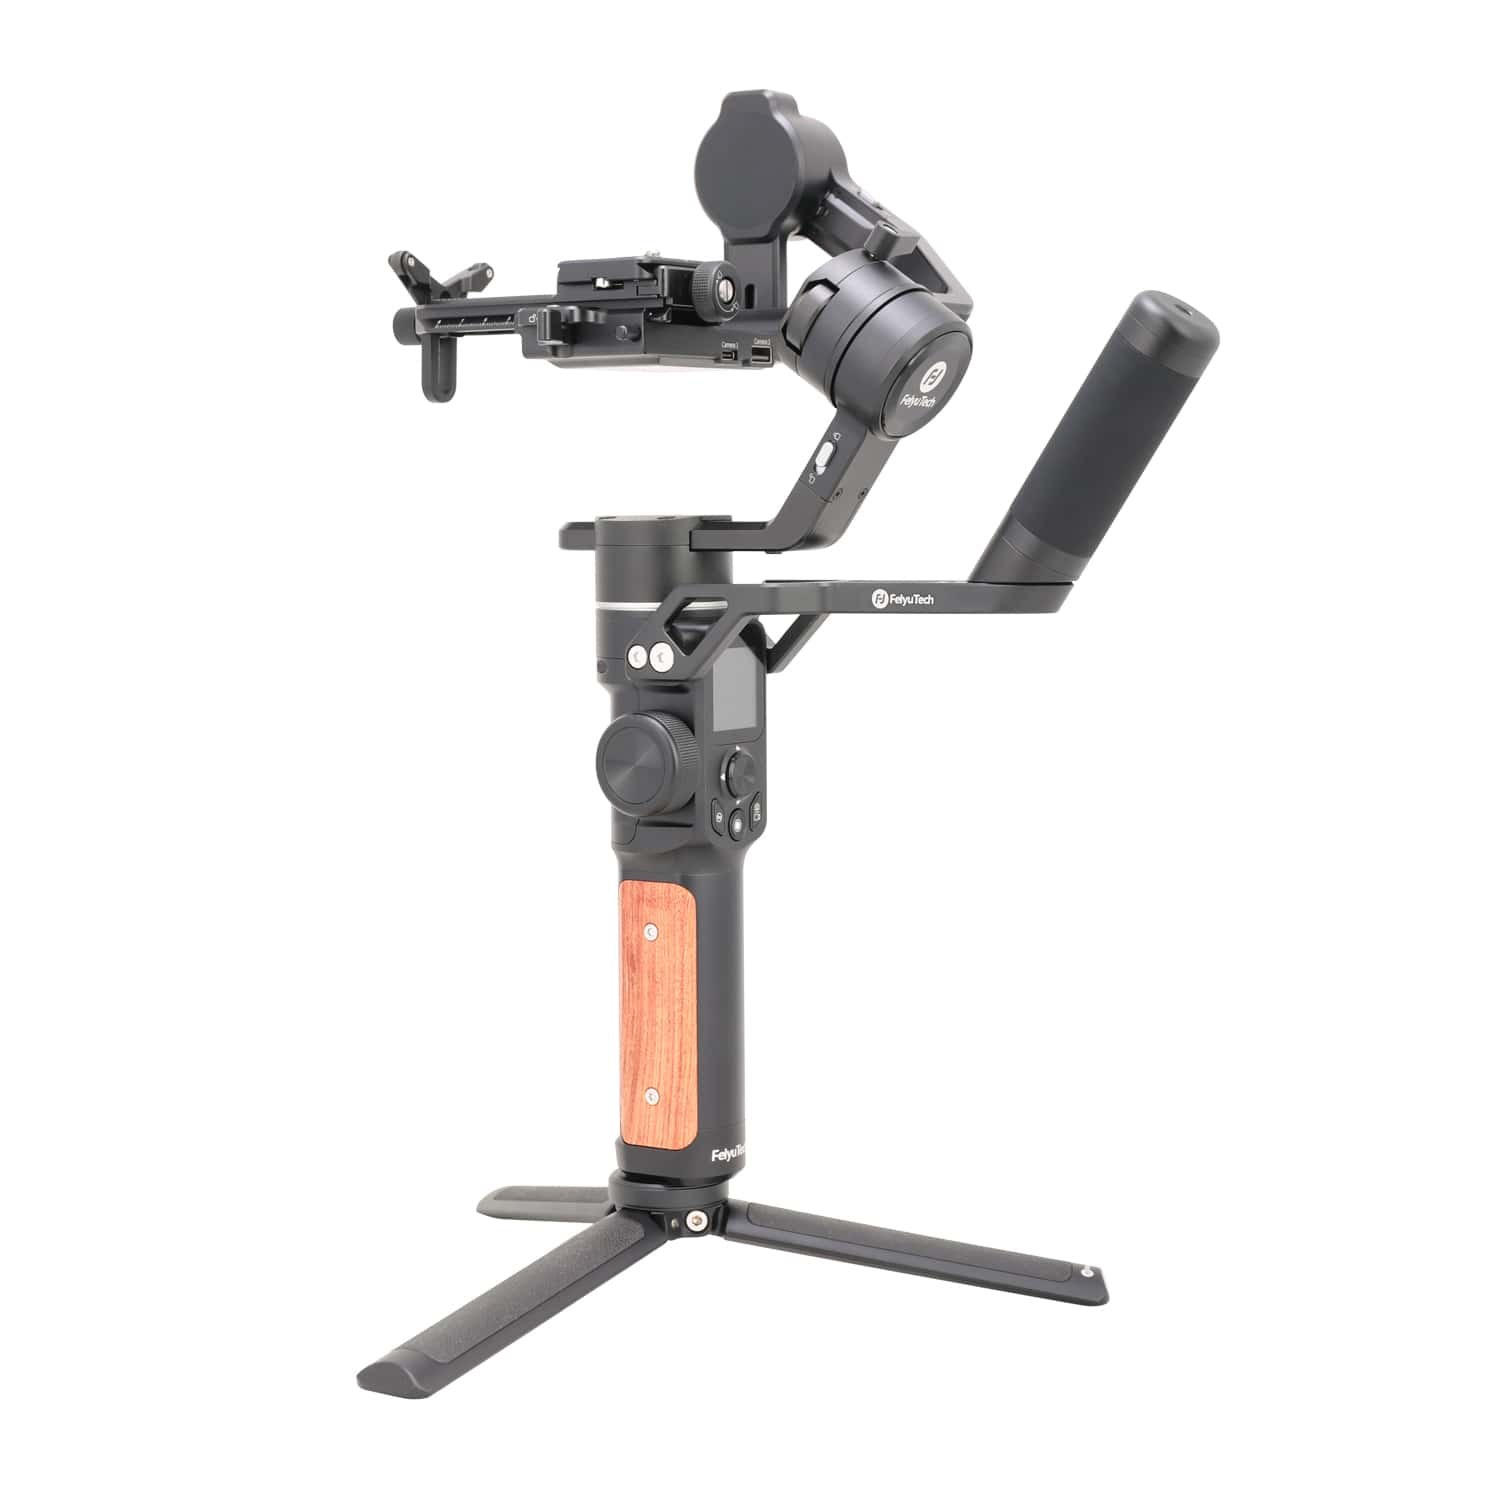 Feiyu AK2000S stands on a tripod in profile